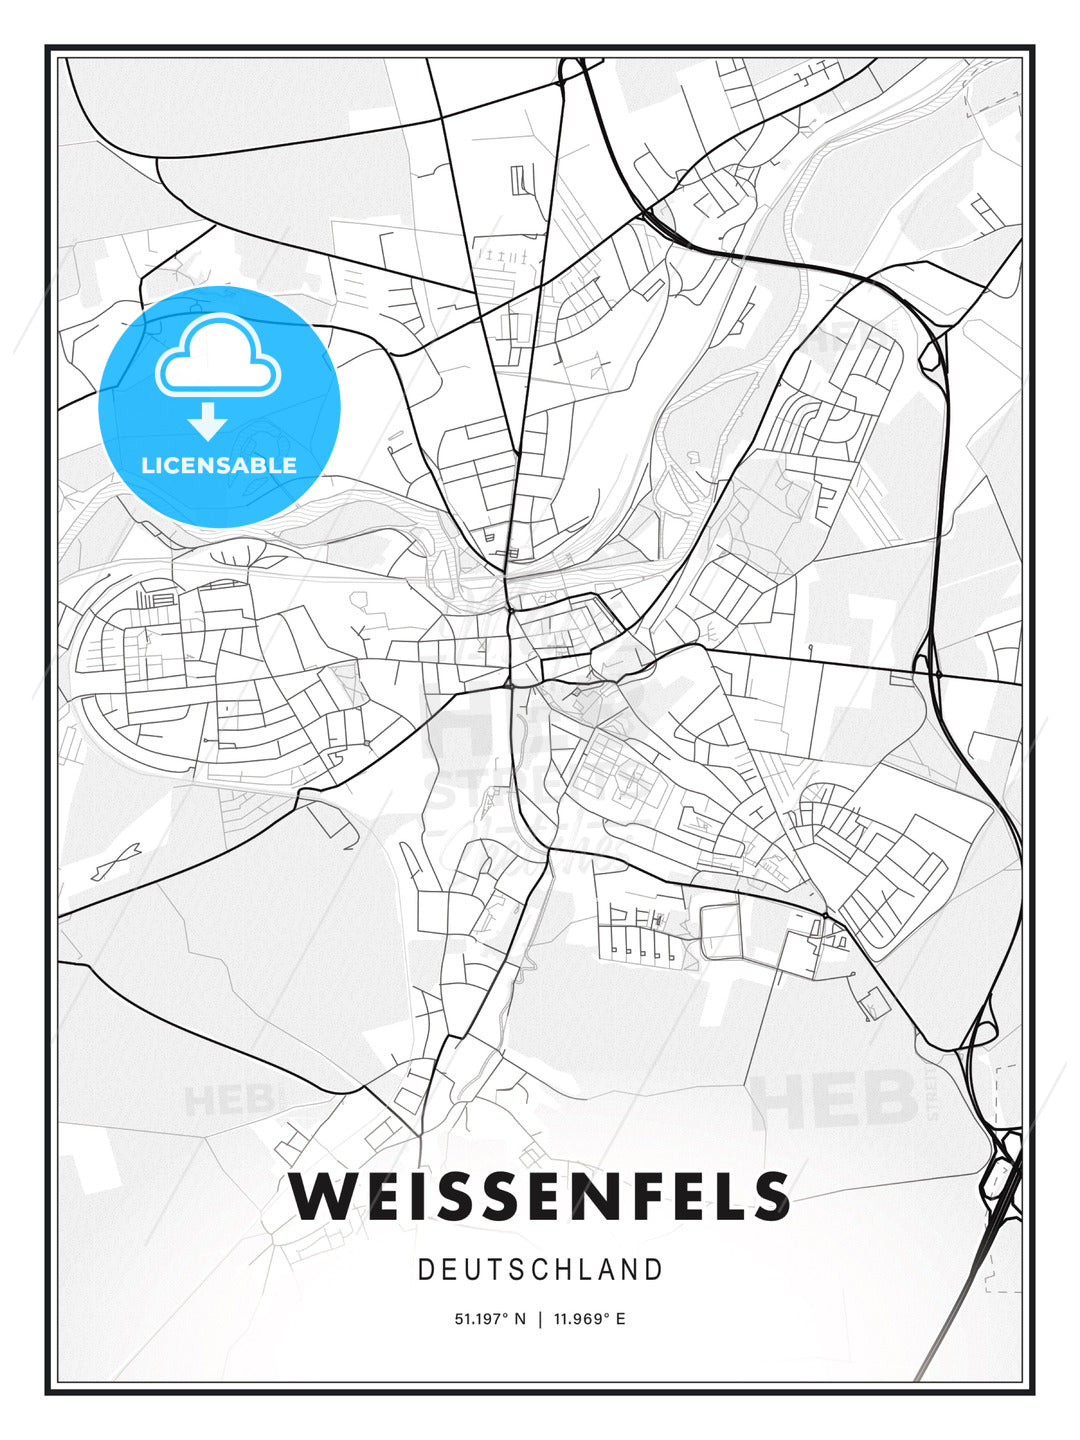 WEISSENFELS / Weißenfels, Germany, Modern Print Template in Various Formats - HEBSTREITS Sketches